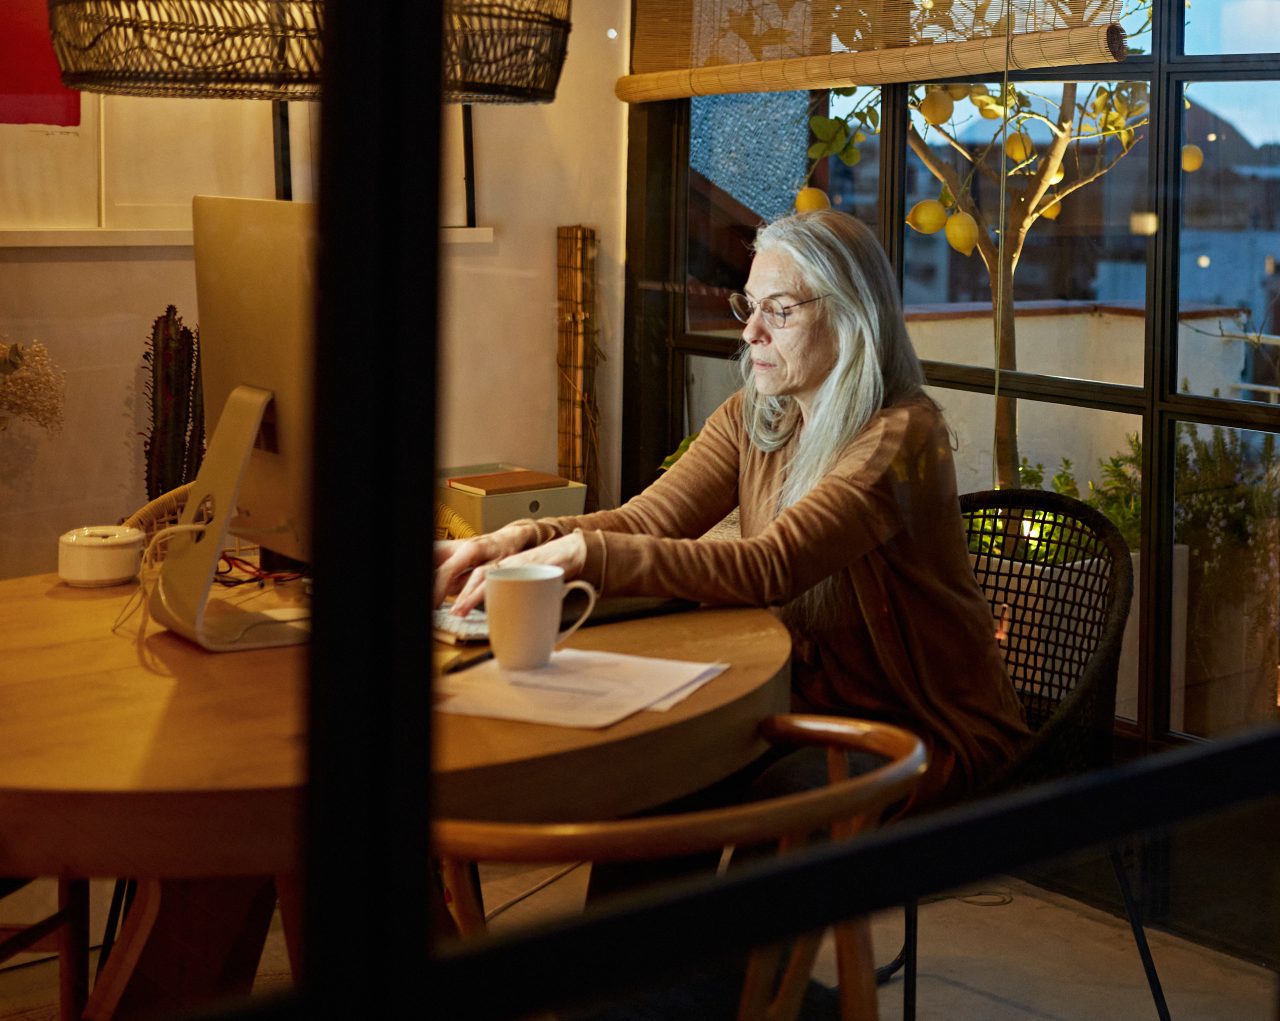 Partial view of gray-haired Caucasian woman wearing eyeglasses and casual clothing photographed through sun room window at end of workday.